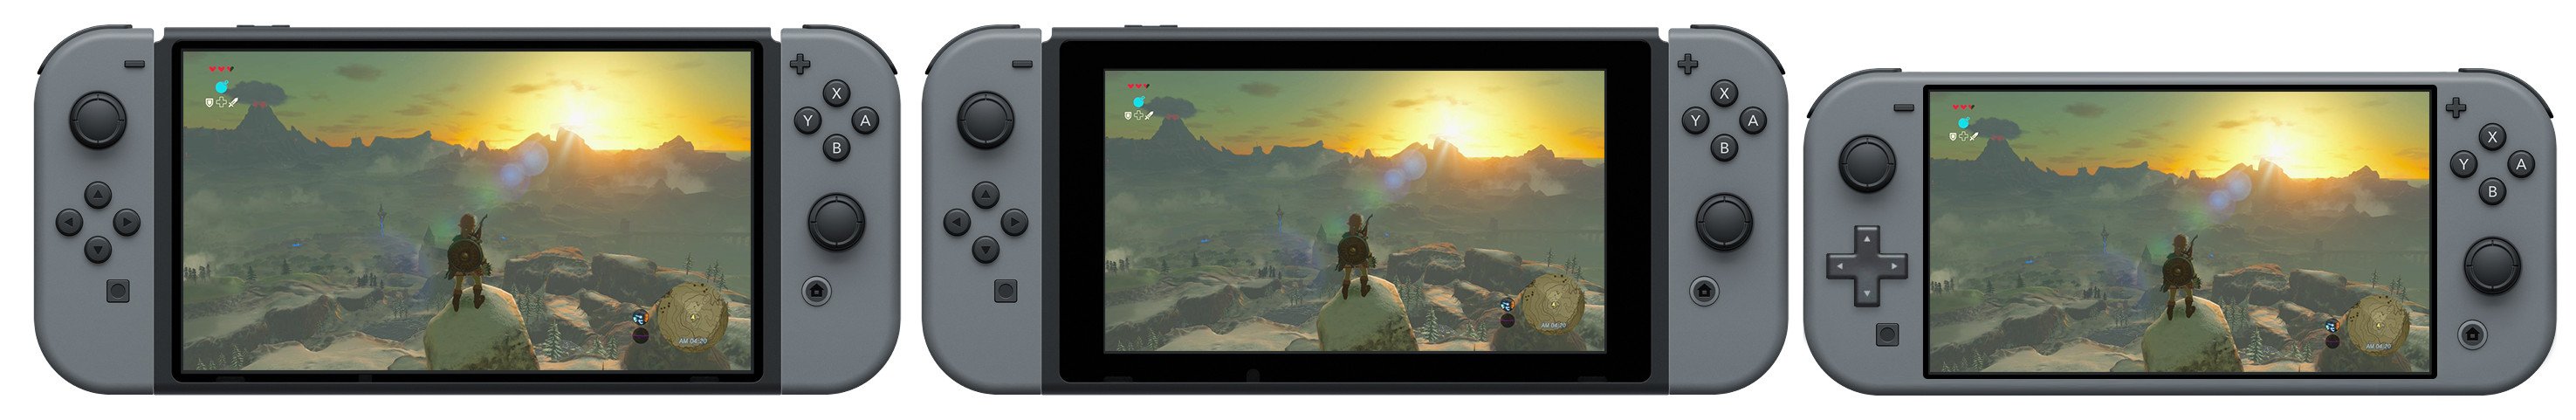 New Nintendo Switch Release Date Price And Features For - nintendo switch two new models